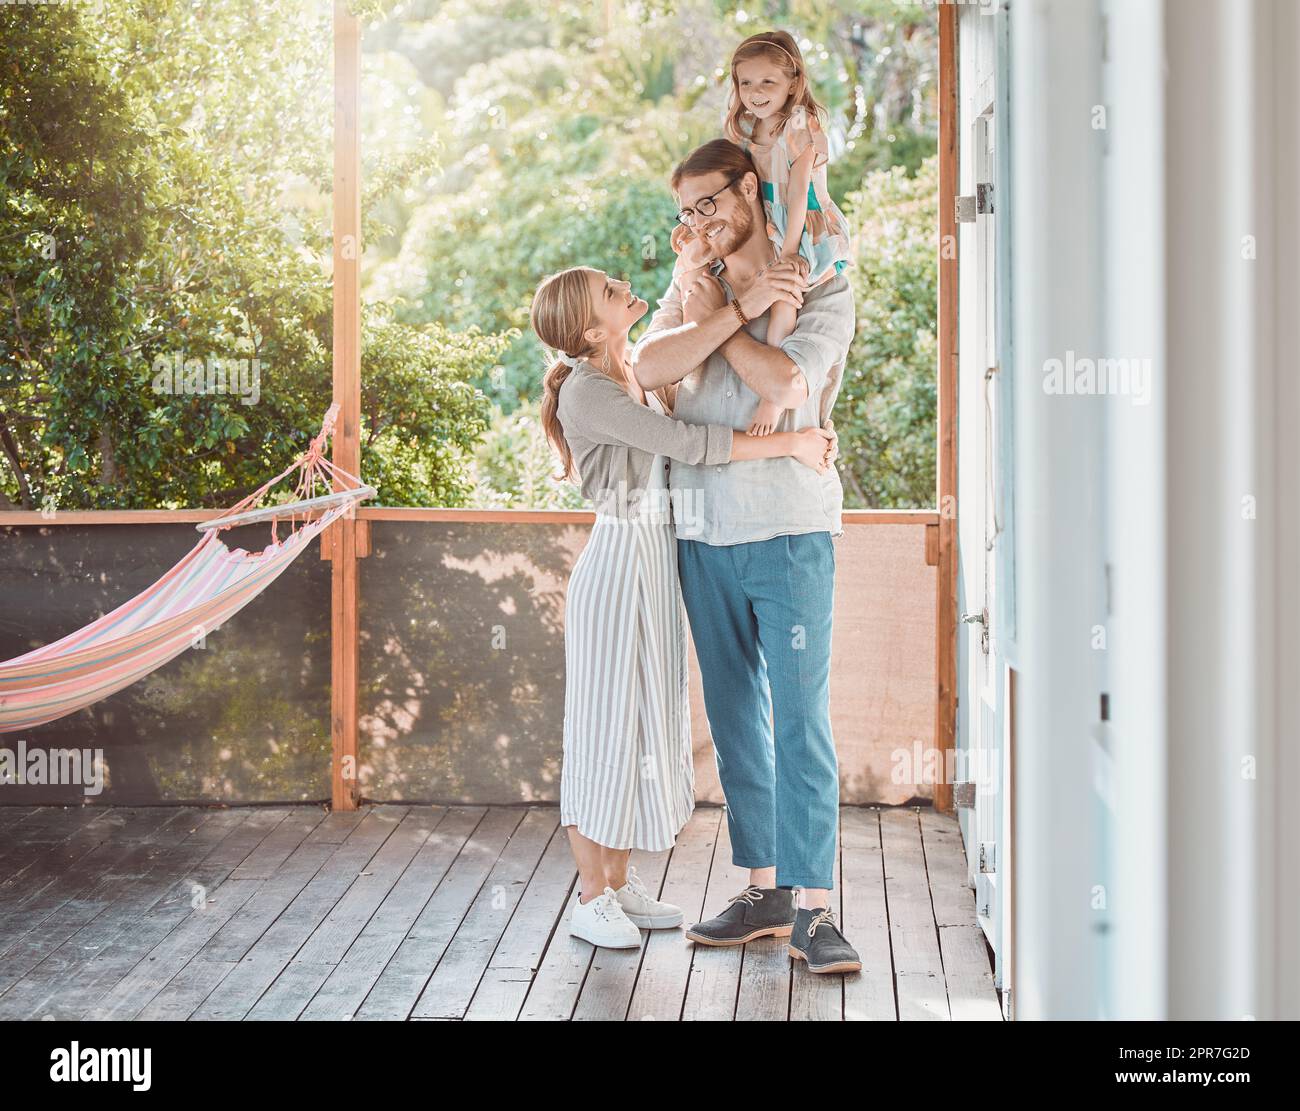 These are the days we live for. Shot of a young family spending time together at home. Stock Photo